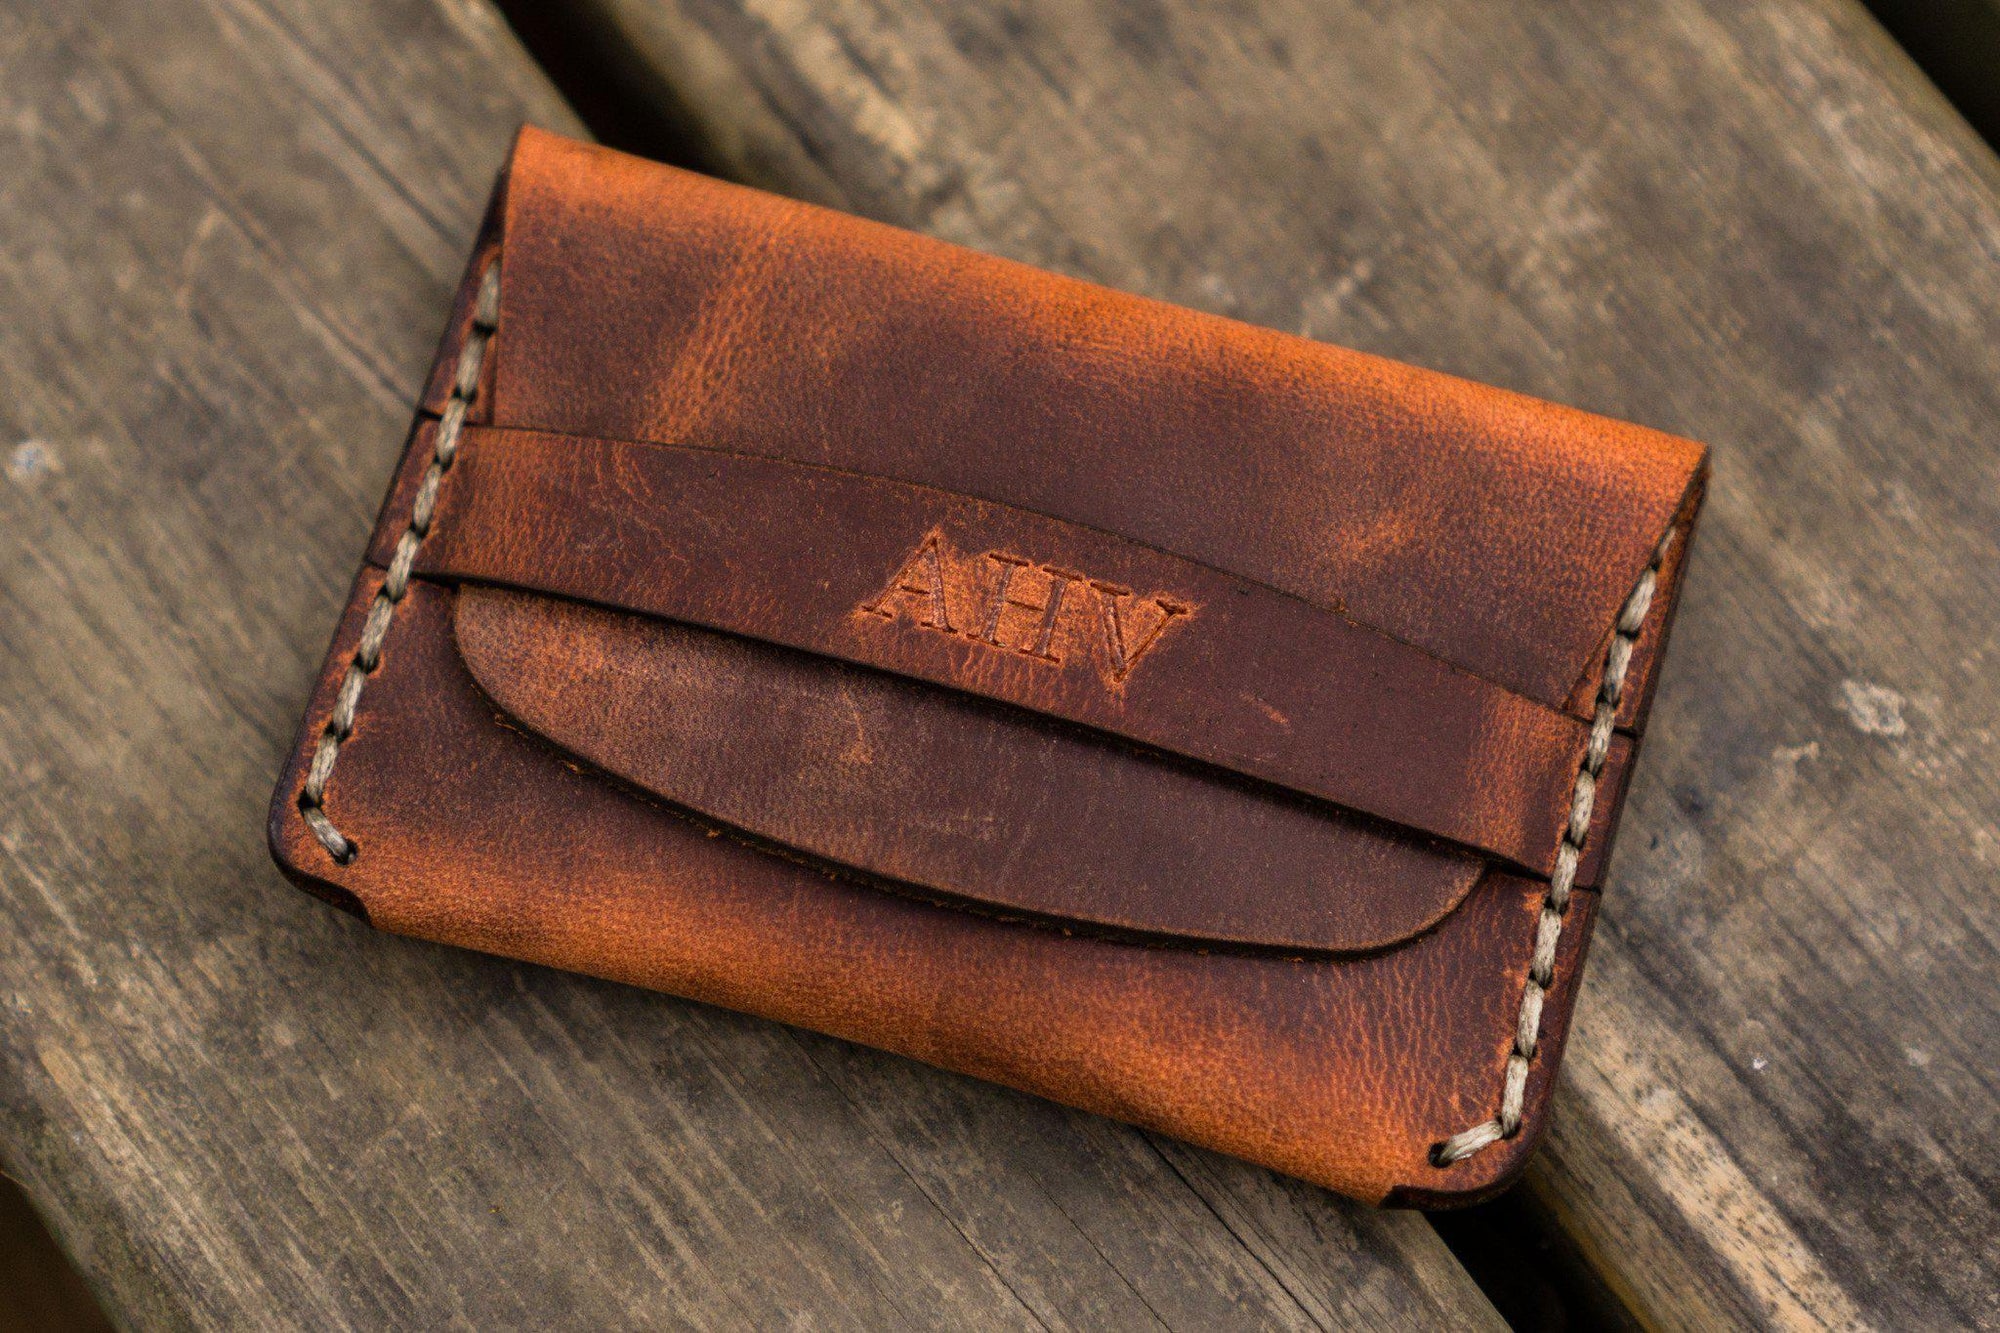 Card Holder Monogram - Wallets and Small Leather Goods